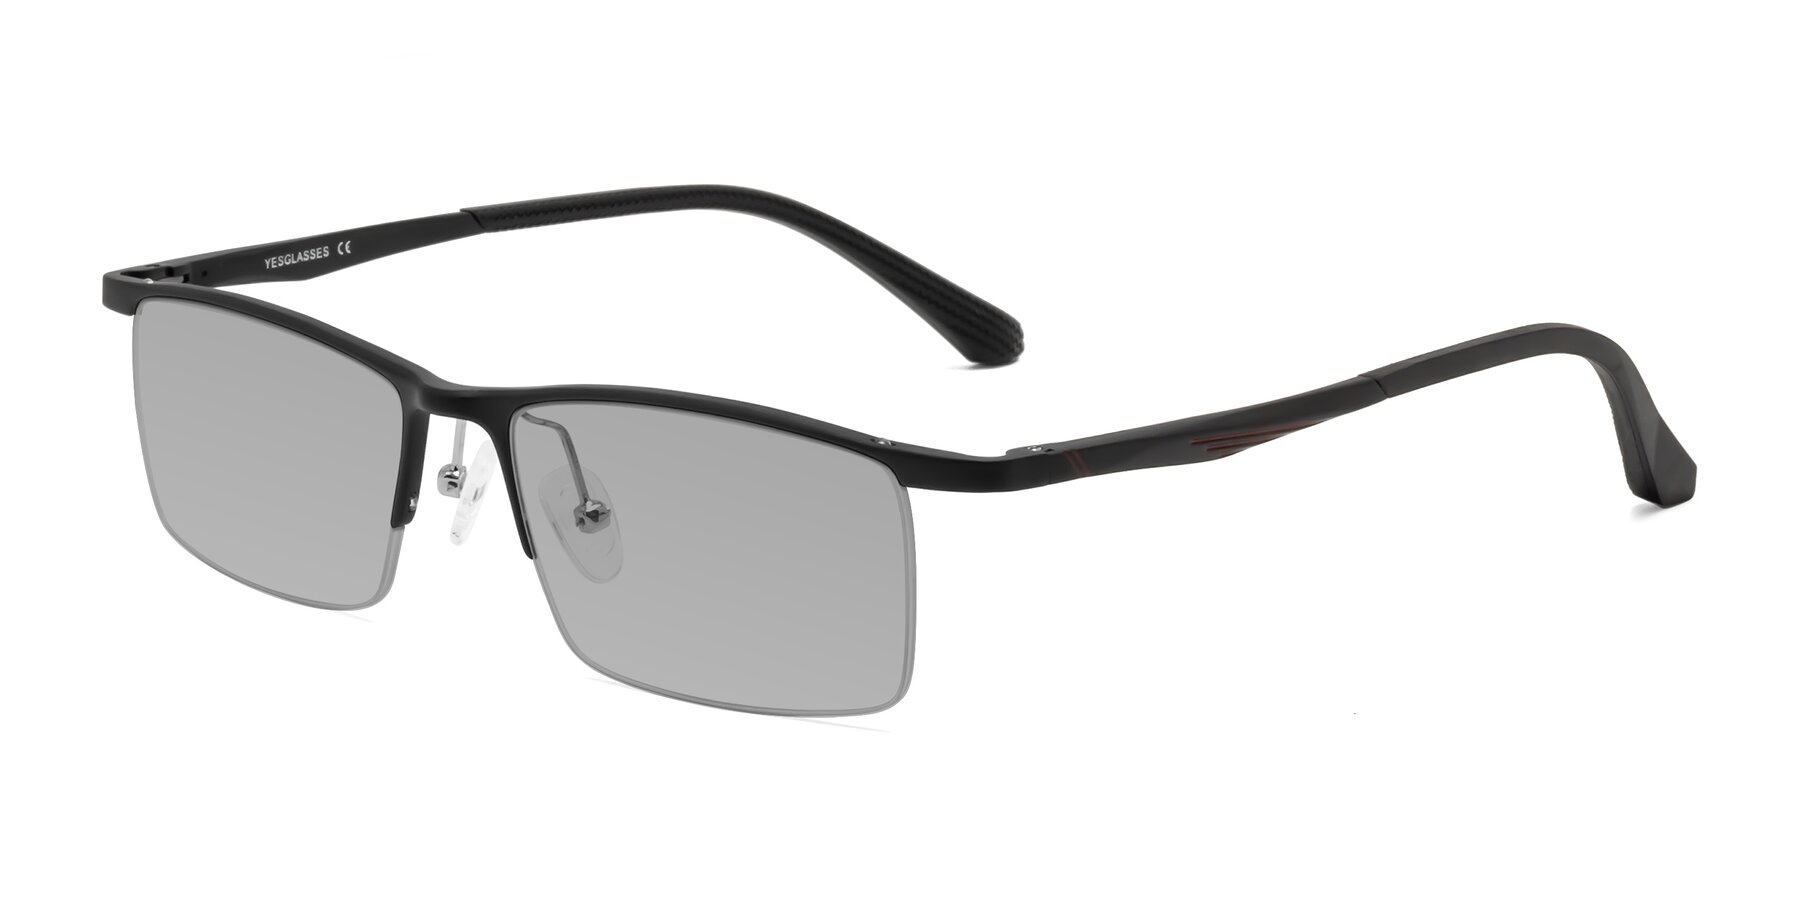 Angle of CX6236 in Black with Light Gray Tinted Lenses